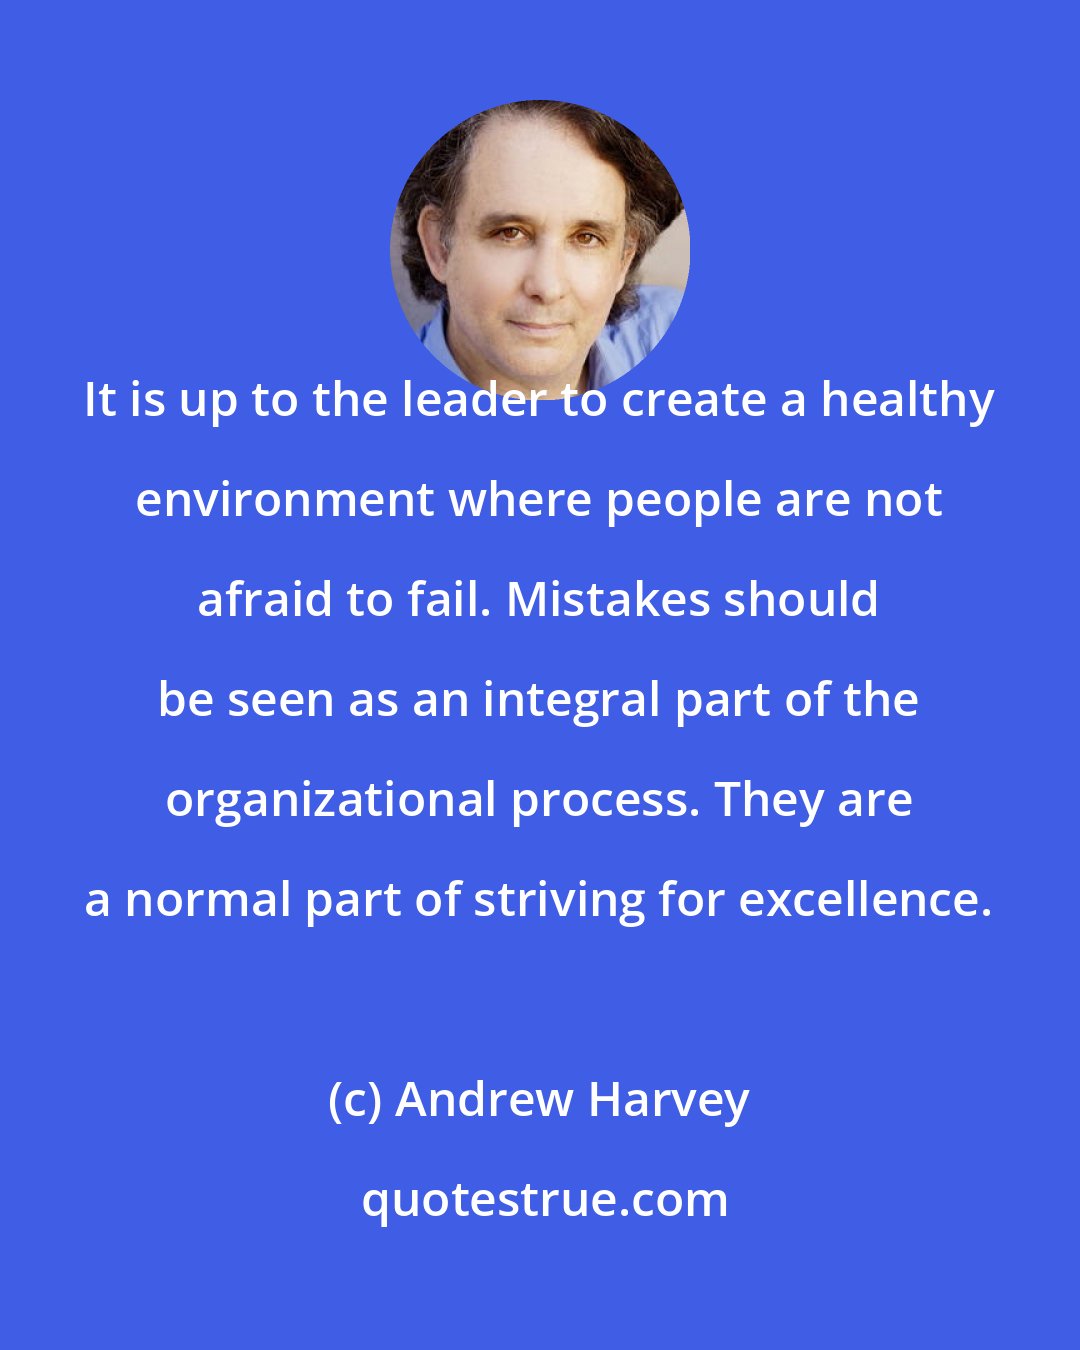 Andrew Harvey: It is up to the leader to create a healthy environment where people are not afraid to fail. Mistakes should be seen as an integral part of the organizational process. They are a normal part of striving for excellence.